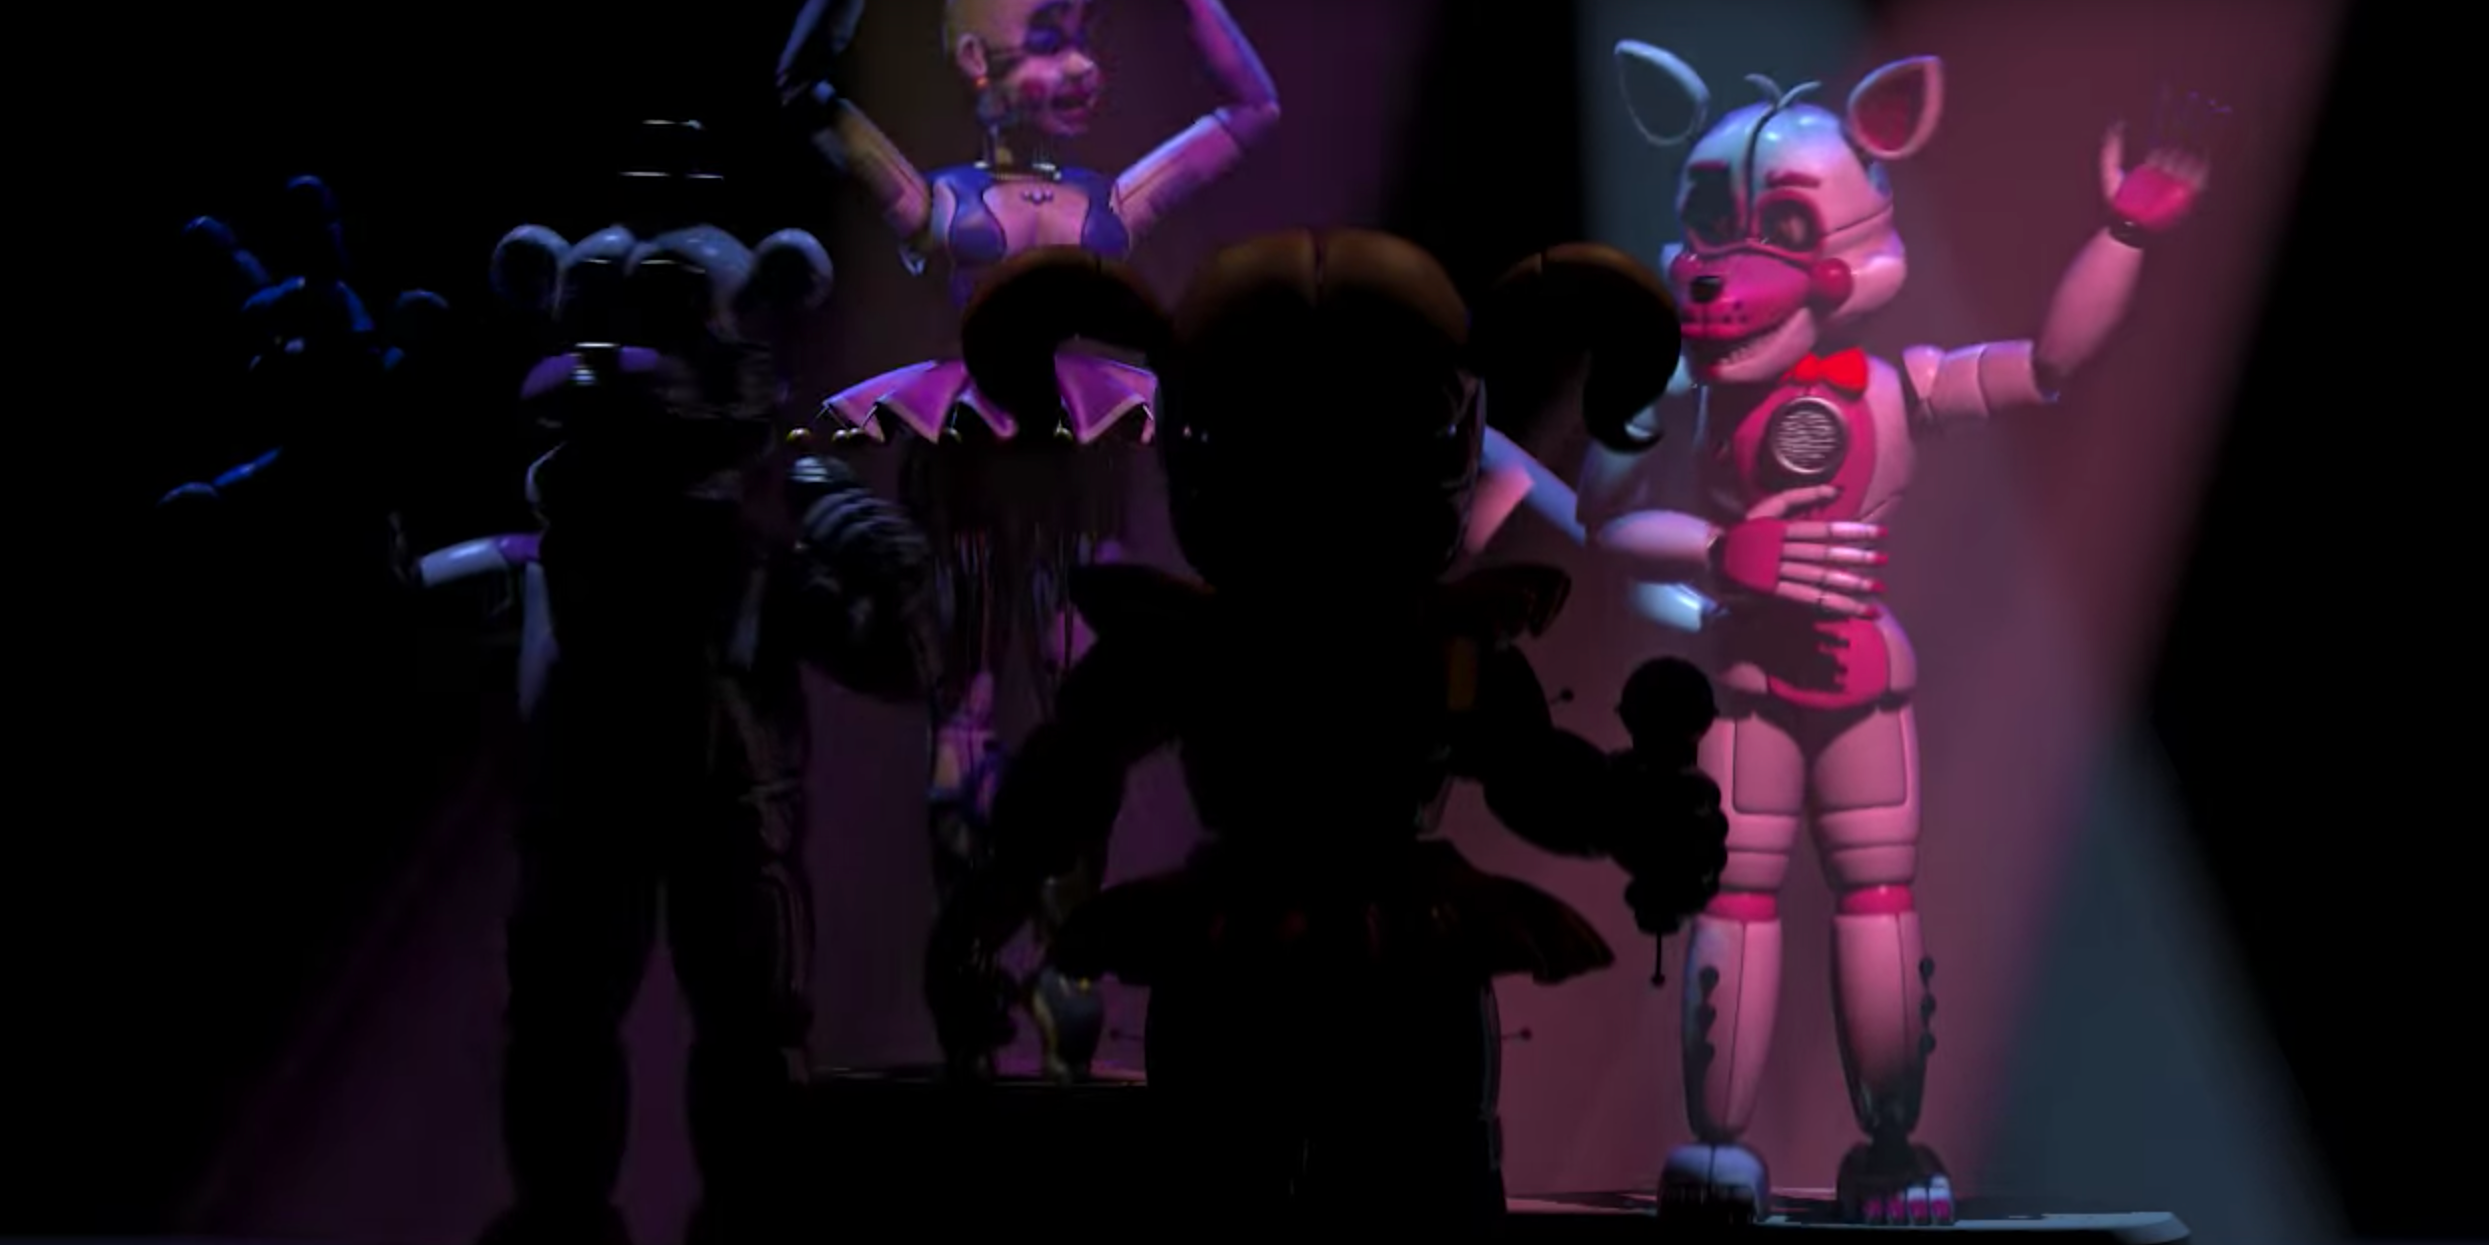 Five Nights at Freddy's na App Store